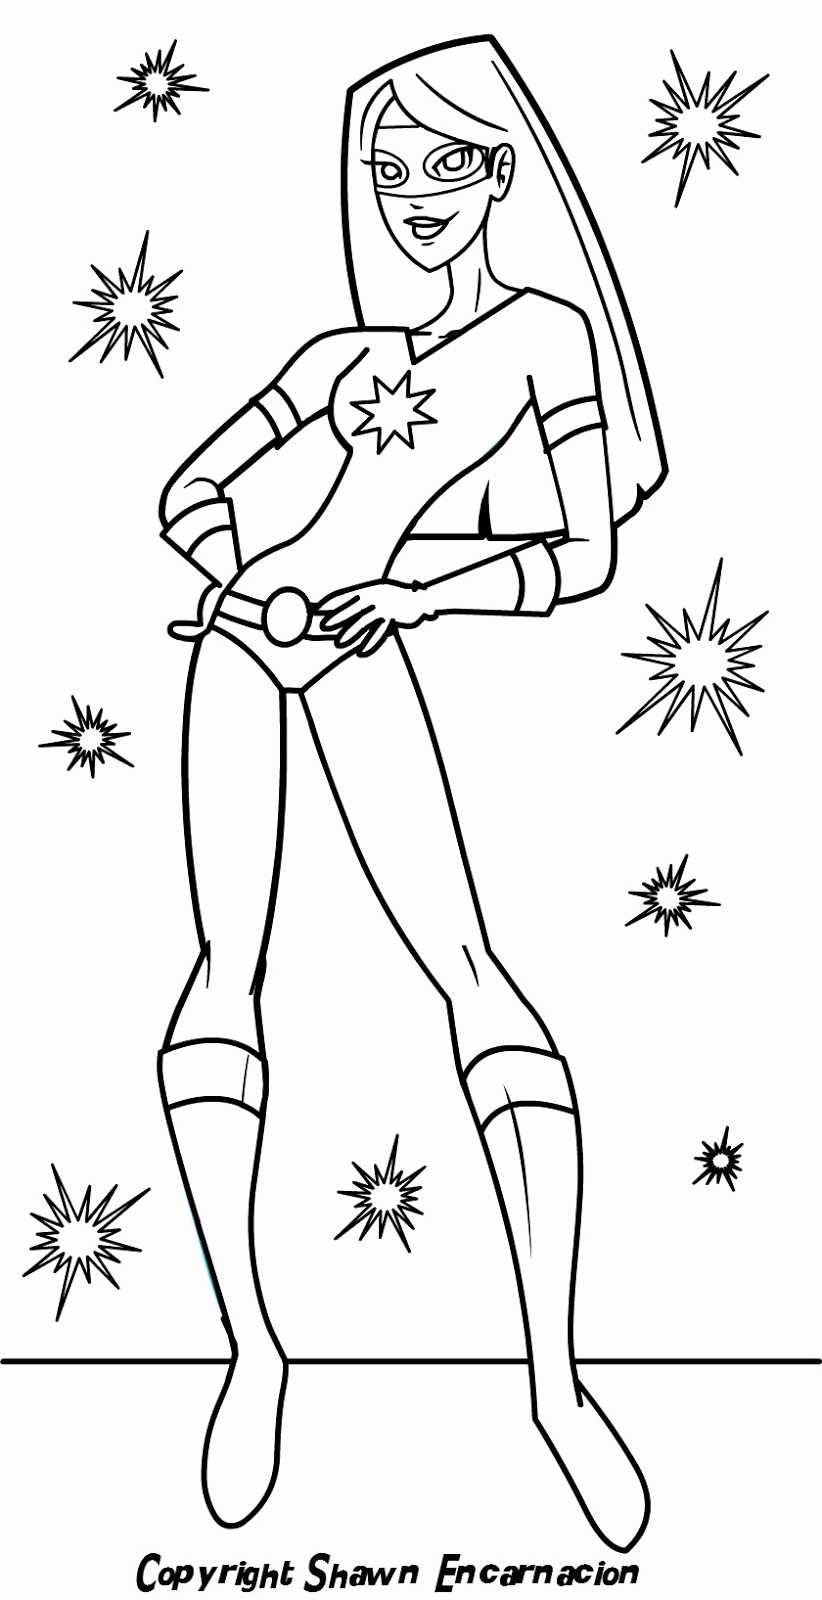 Female Superhero Coloring Pages Inspirational Superhero Girls Coloring Pages Coloring Home